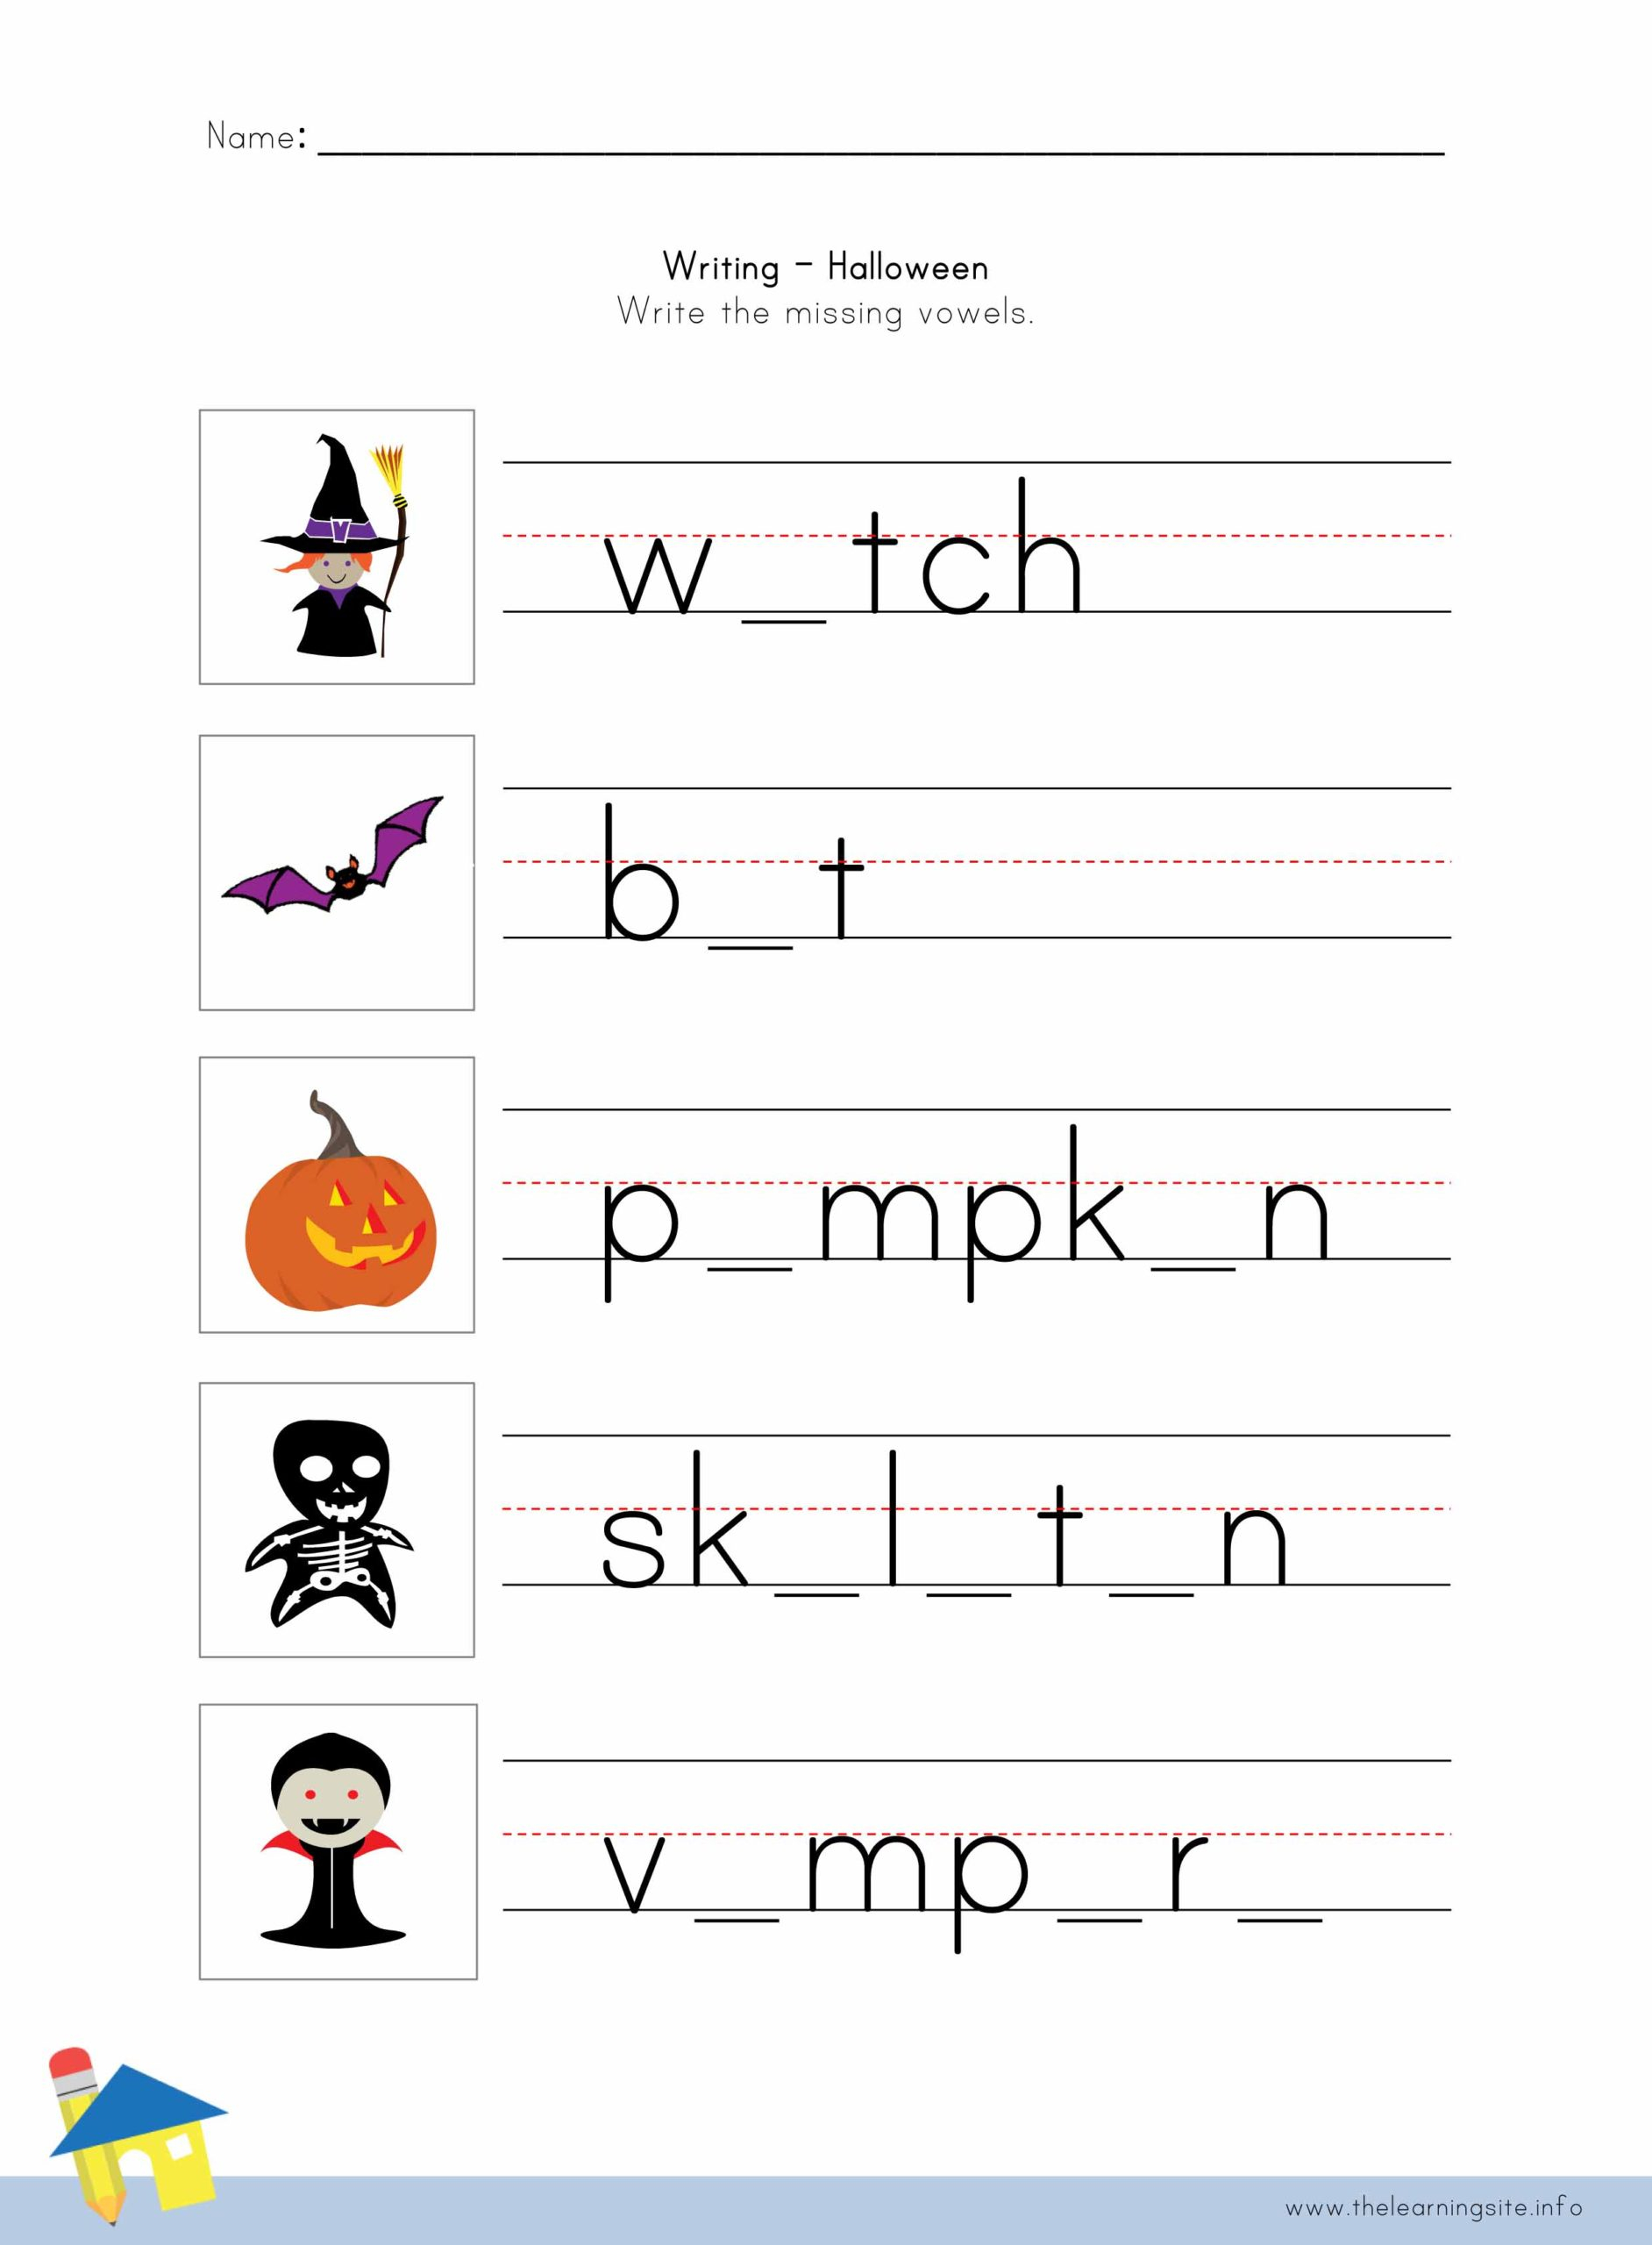 Halloween Writing Worksheet 3 – The Learning Site